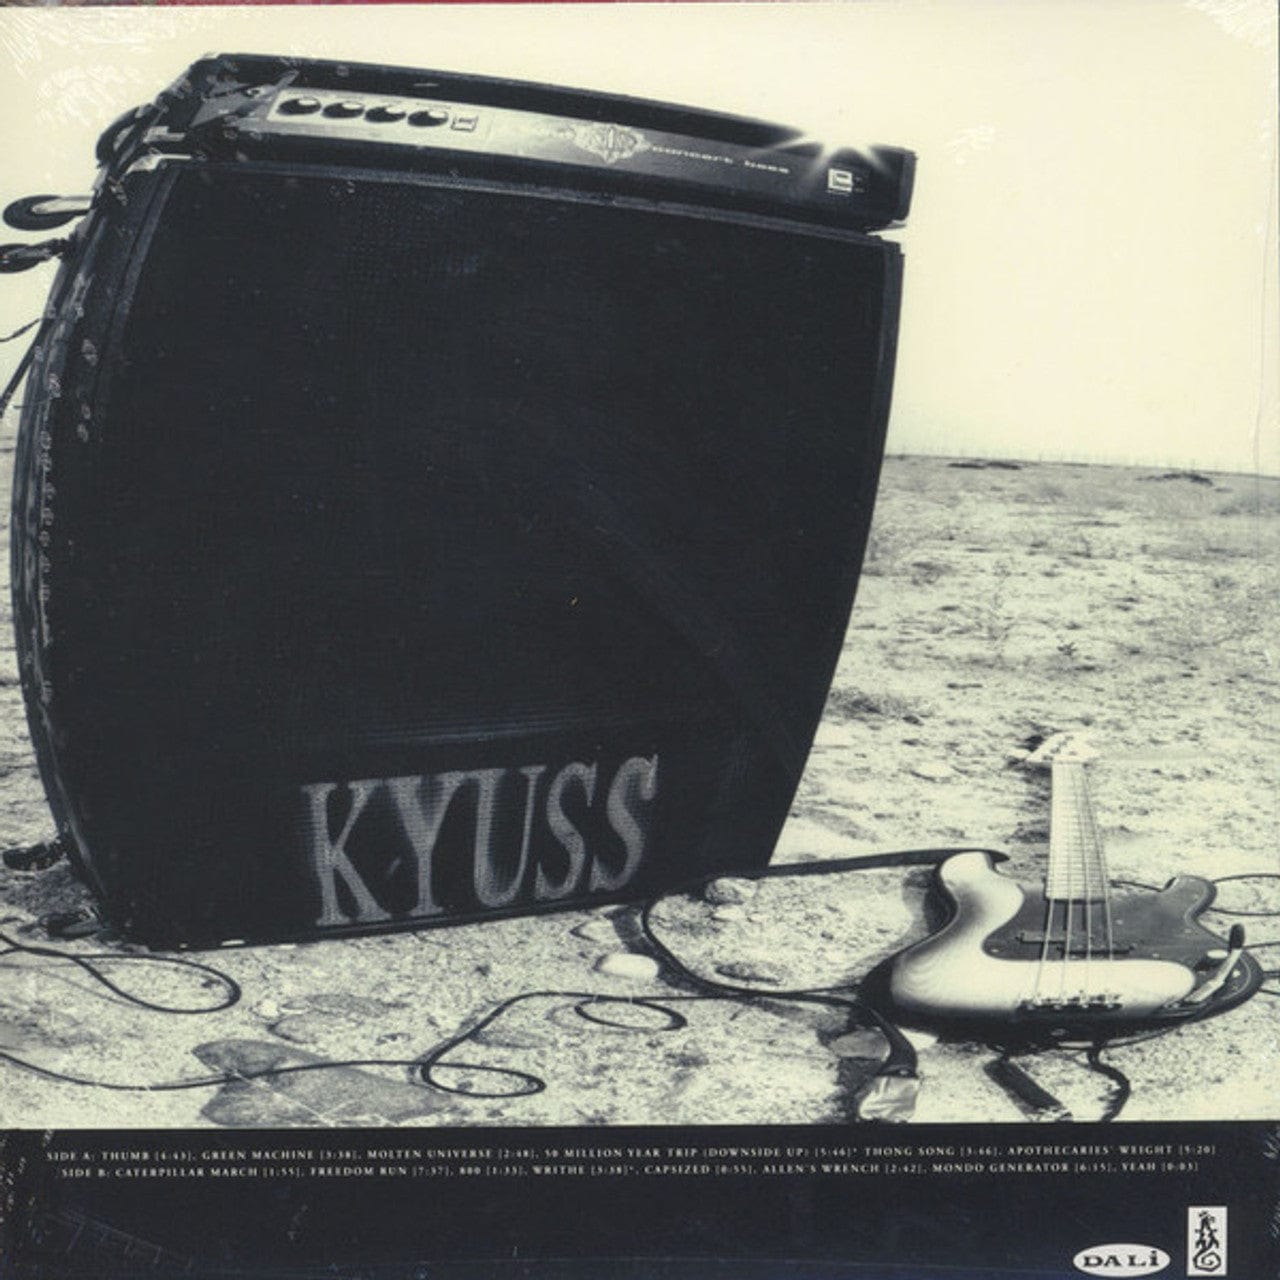 KYUSS: Blues for the Red Sun LP